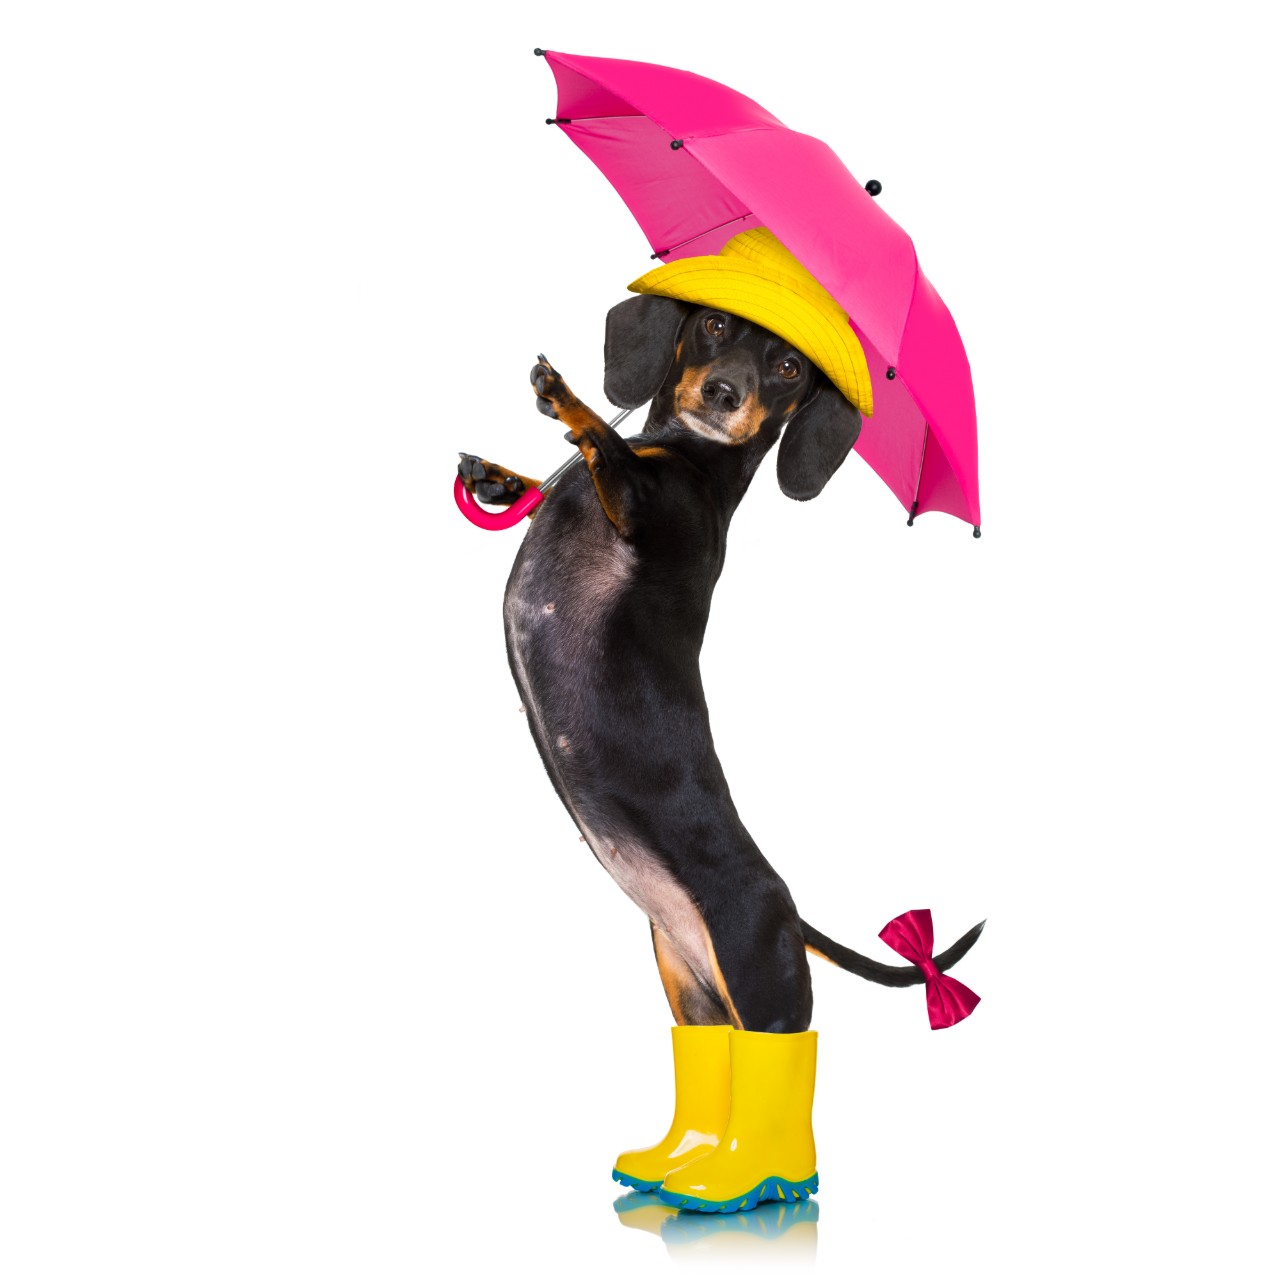 Dog in BootsWith Pink Umbrella